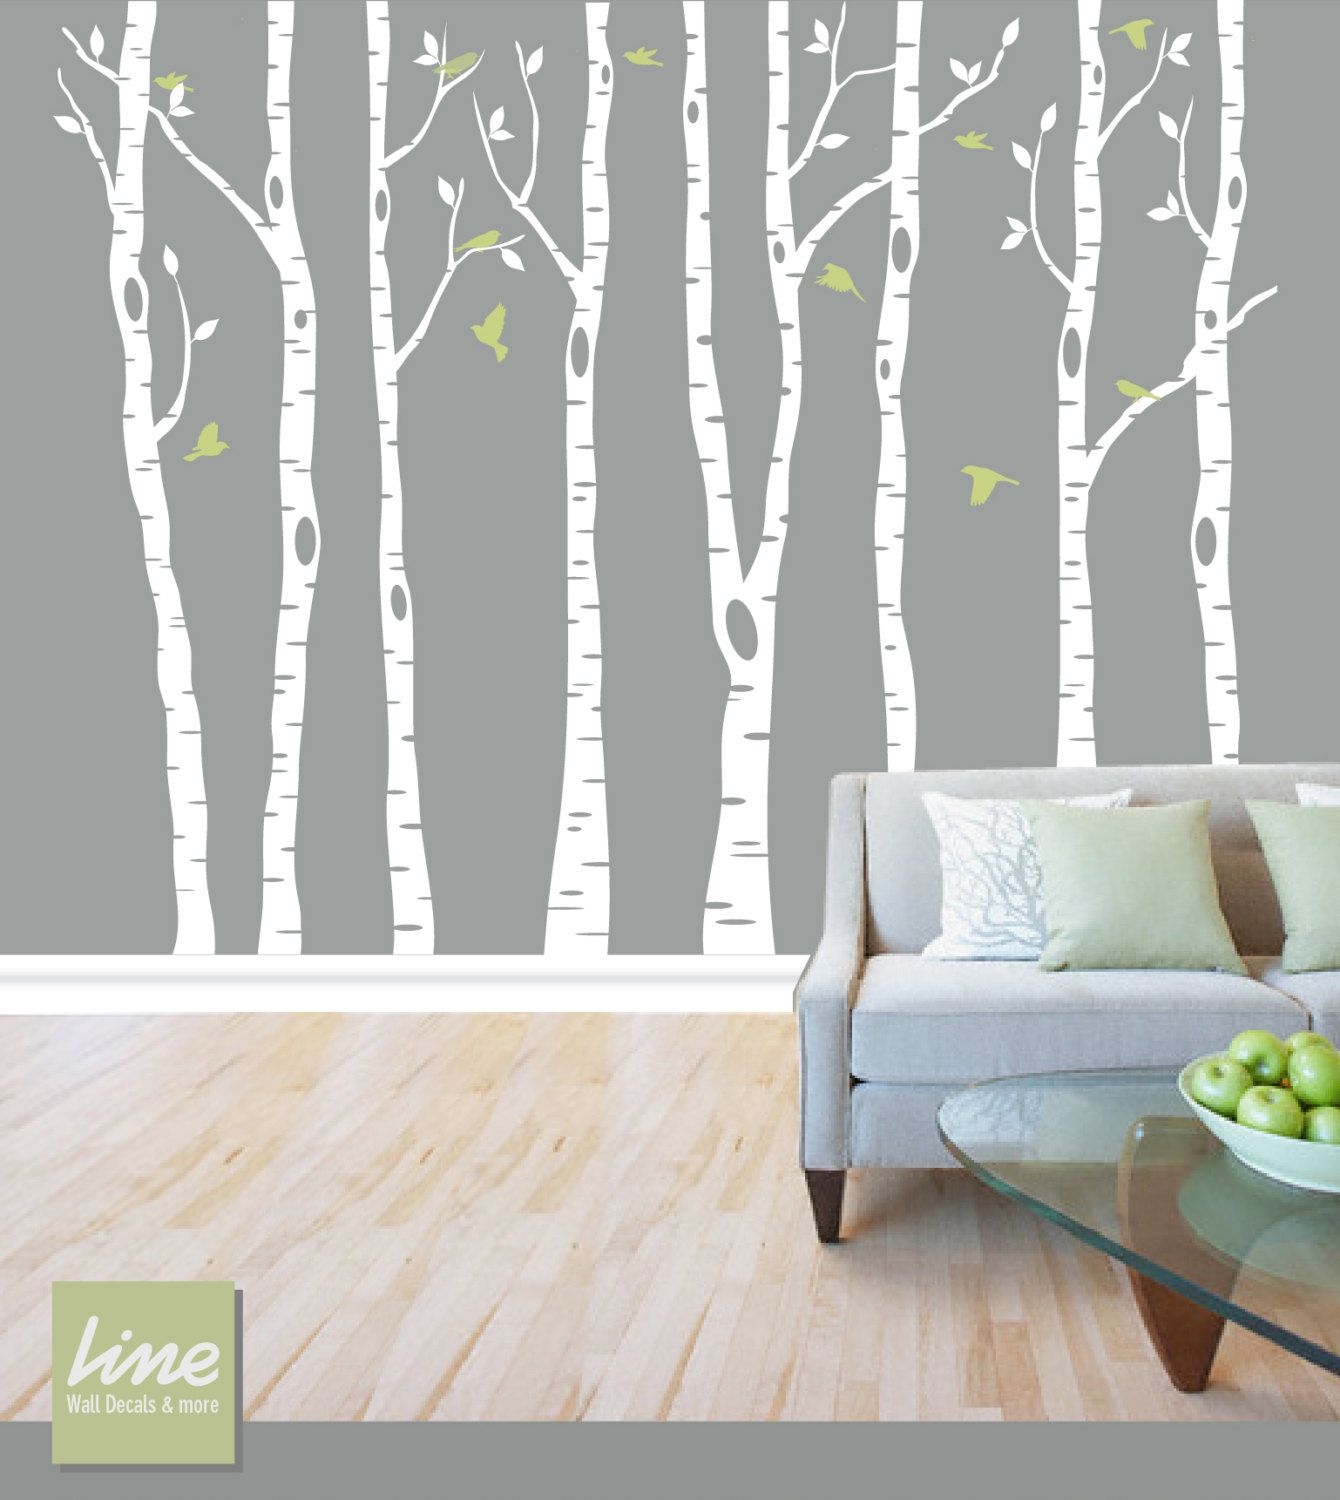 Funny Tree Home Decor Vinyl Wall Stickers For Living Room Kids Wall Art Decal